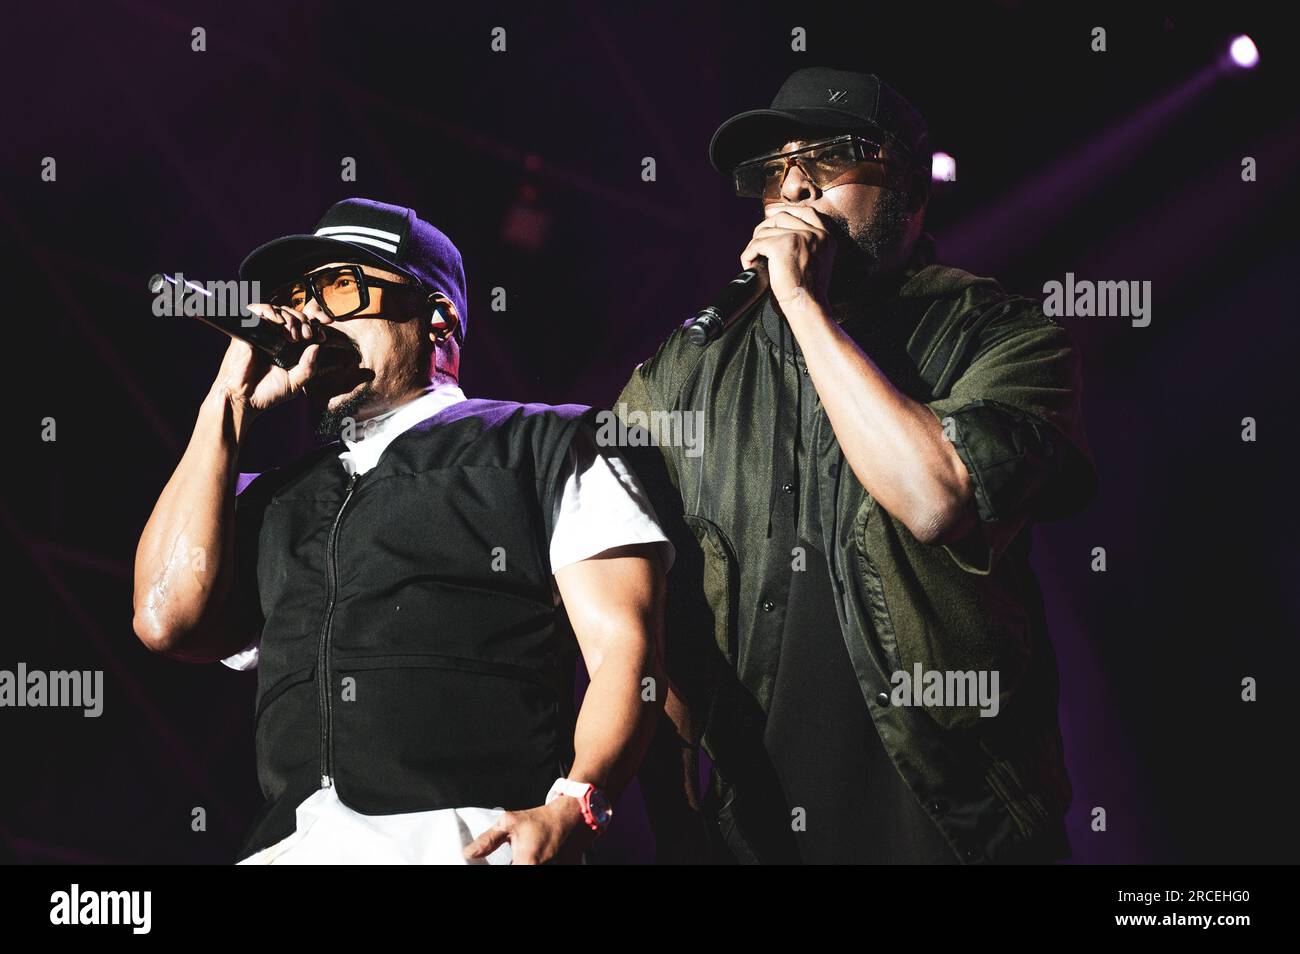 TORINO, STUPINIGI SONIC PARK FESTIVAL 2023, ITALY: Apl.de.ap (L) and Will.i.am (R) of the American musical group consisting of rappers called Black Eyed Peas performing live at the Stupinigi Sonic Park festival Stock Photo